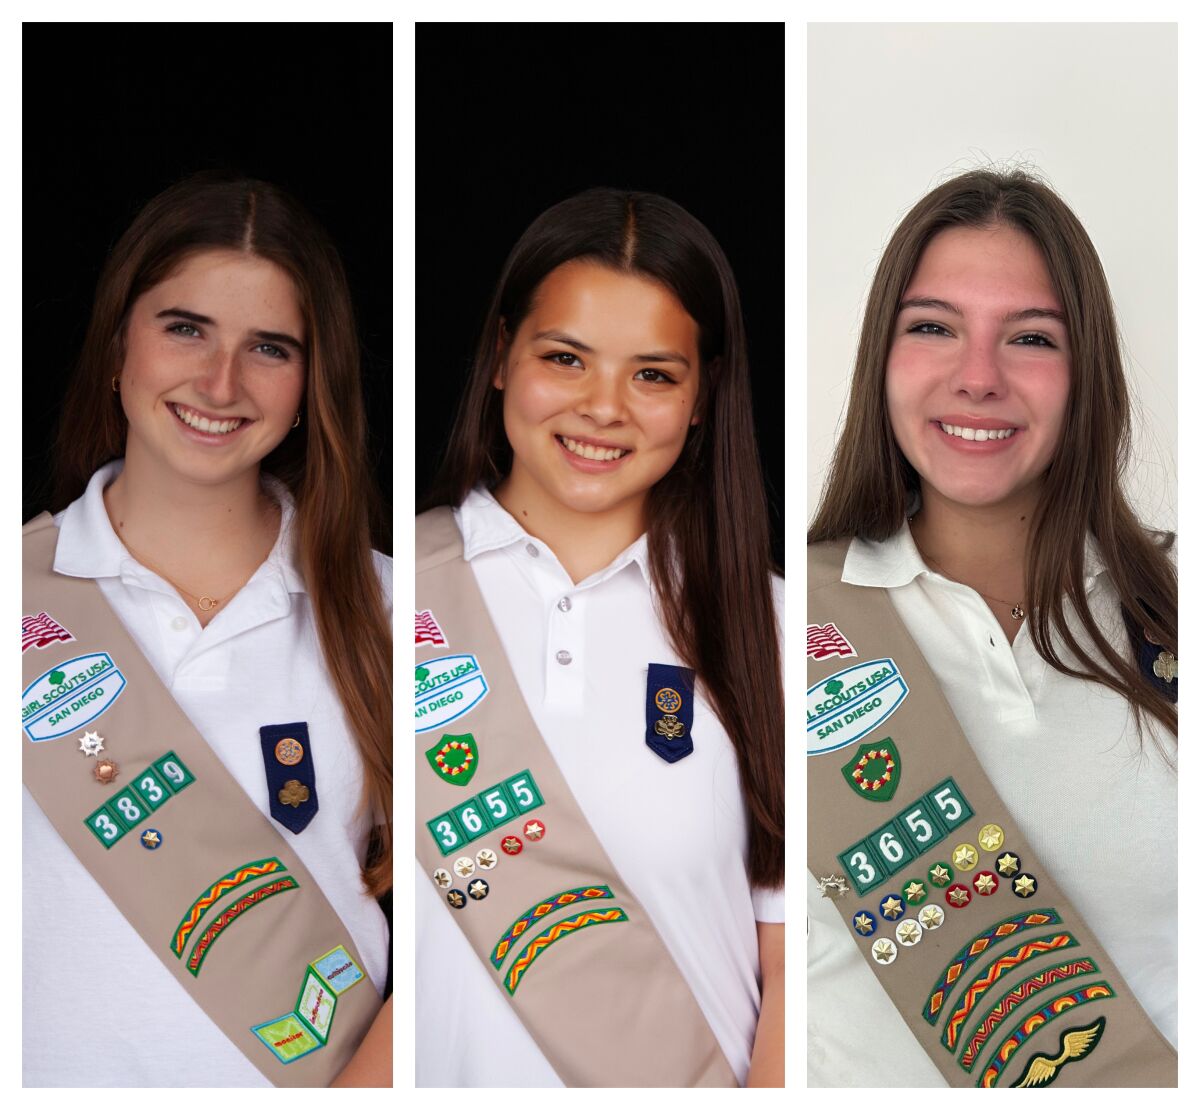 La Jolla High seniors Ashlyn Brunette, Sophie Hochberg and Samantha Ponticello recently achieved the Girl Scout Gold Award.